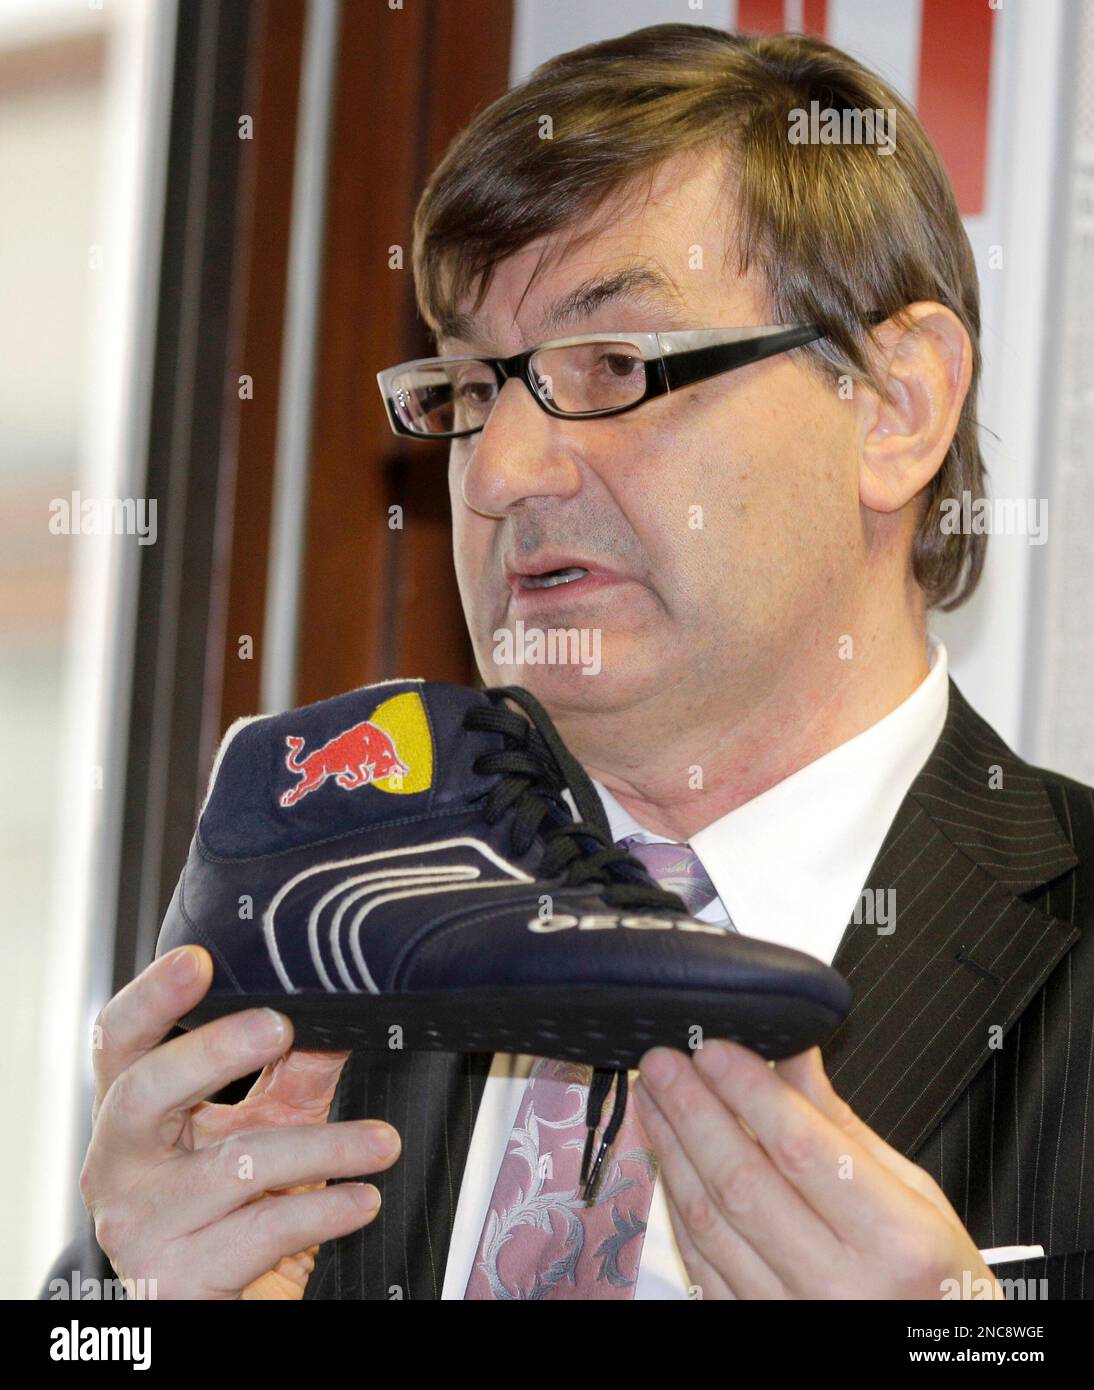 Geox President Mario Moretti Polegato shows a new Formula One Red Bull team  shoe during a news conference in Milan, Thursday, Feb. 17, 2011.(AP  Photo/Luca Bruno Stock Photo - Alamy